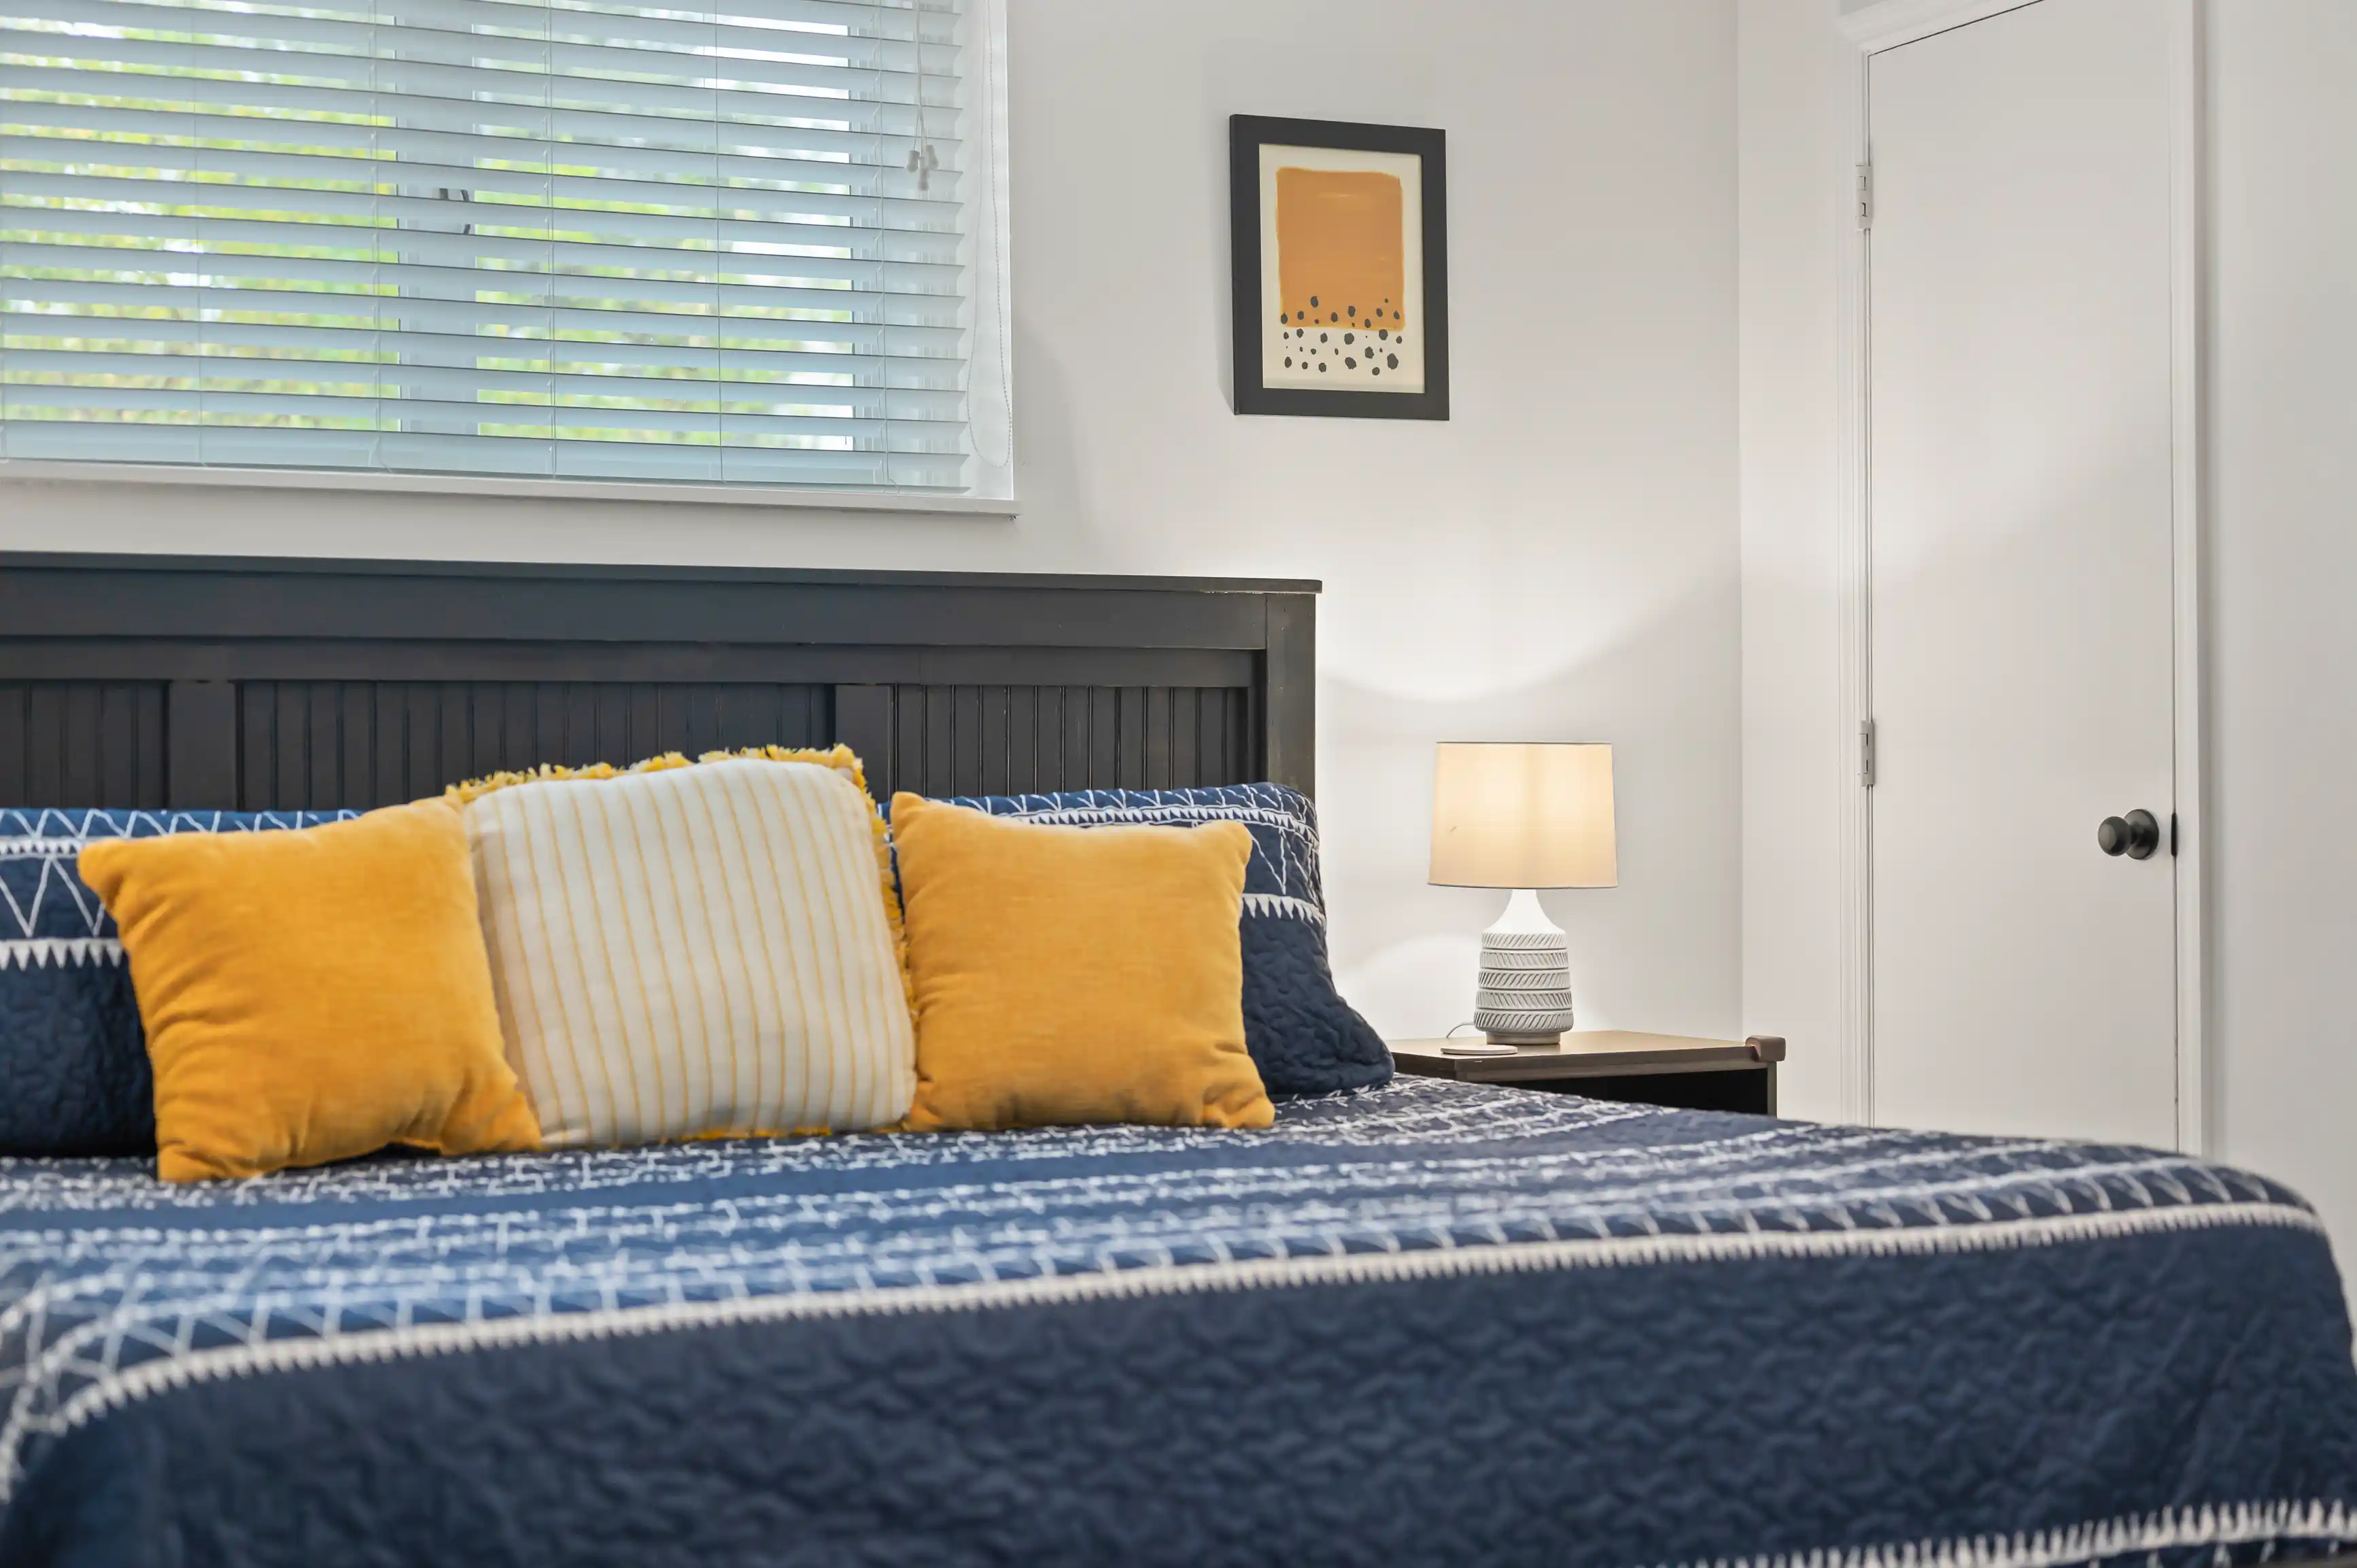 A cozy bedroom with a neatly made bed adorned with blue and yellow pillows, a lamp on a bedside table, closed white blinds on the window, and a framed artwork on the wall.